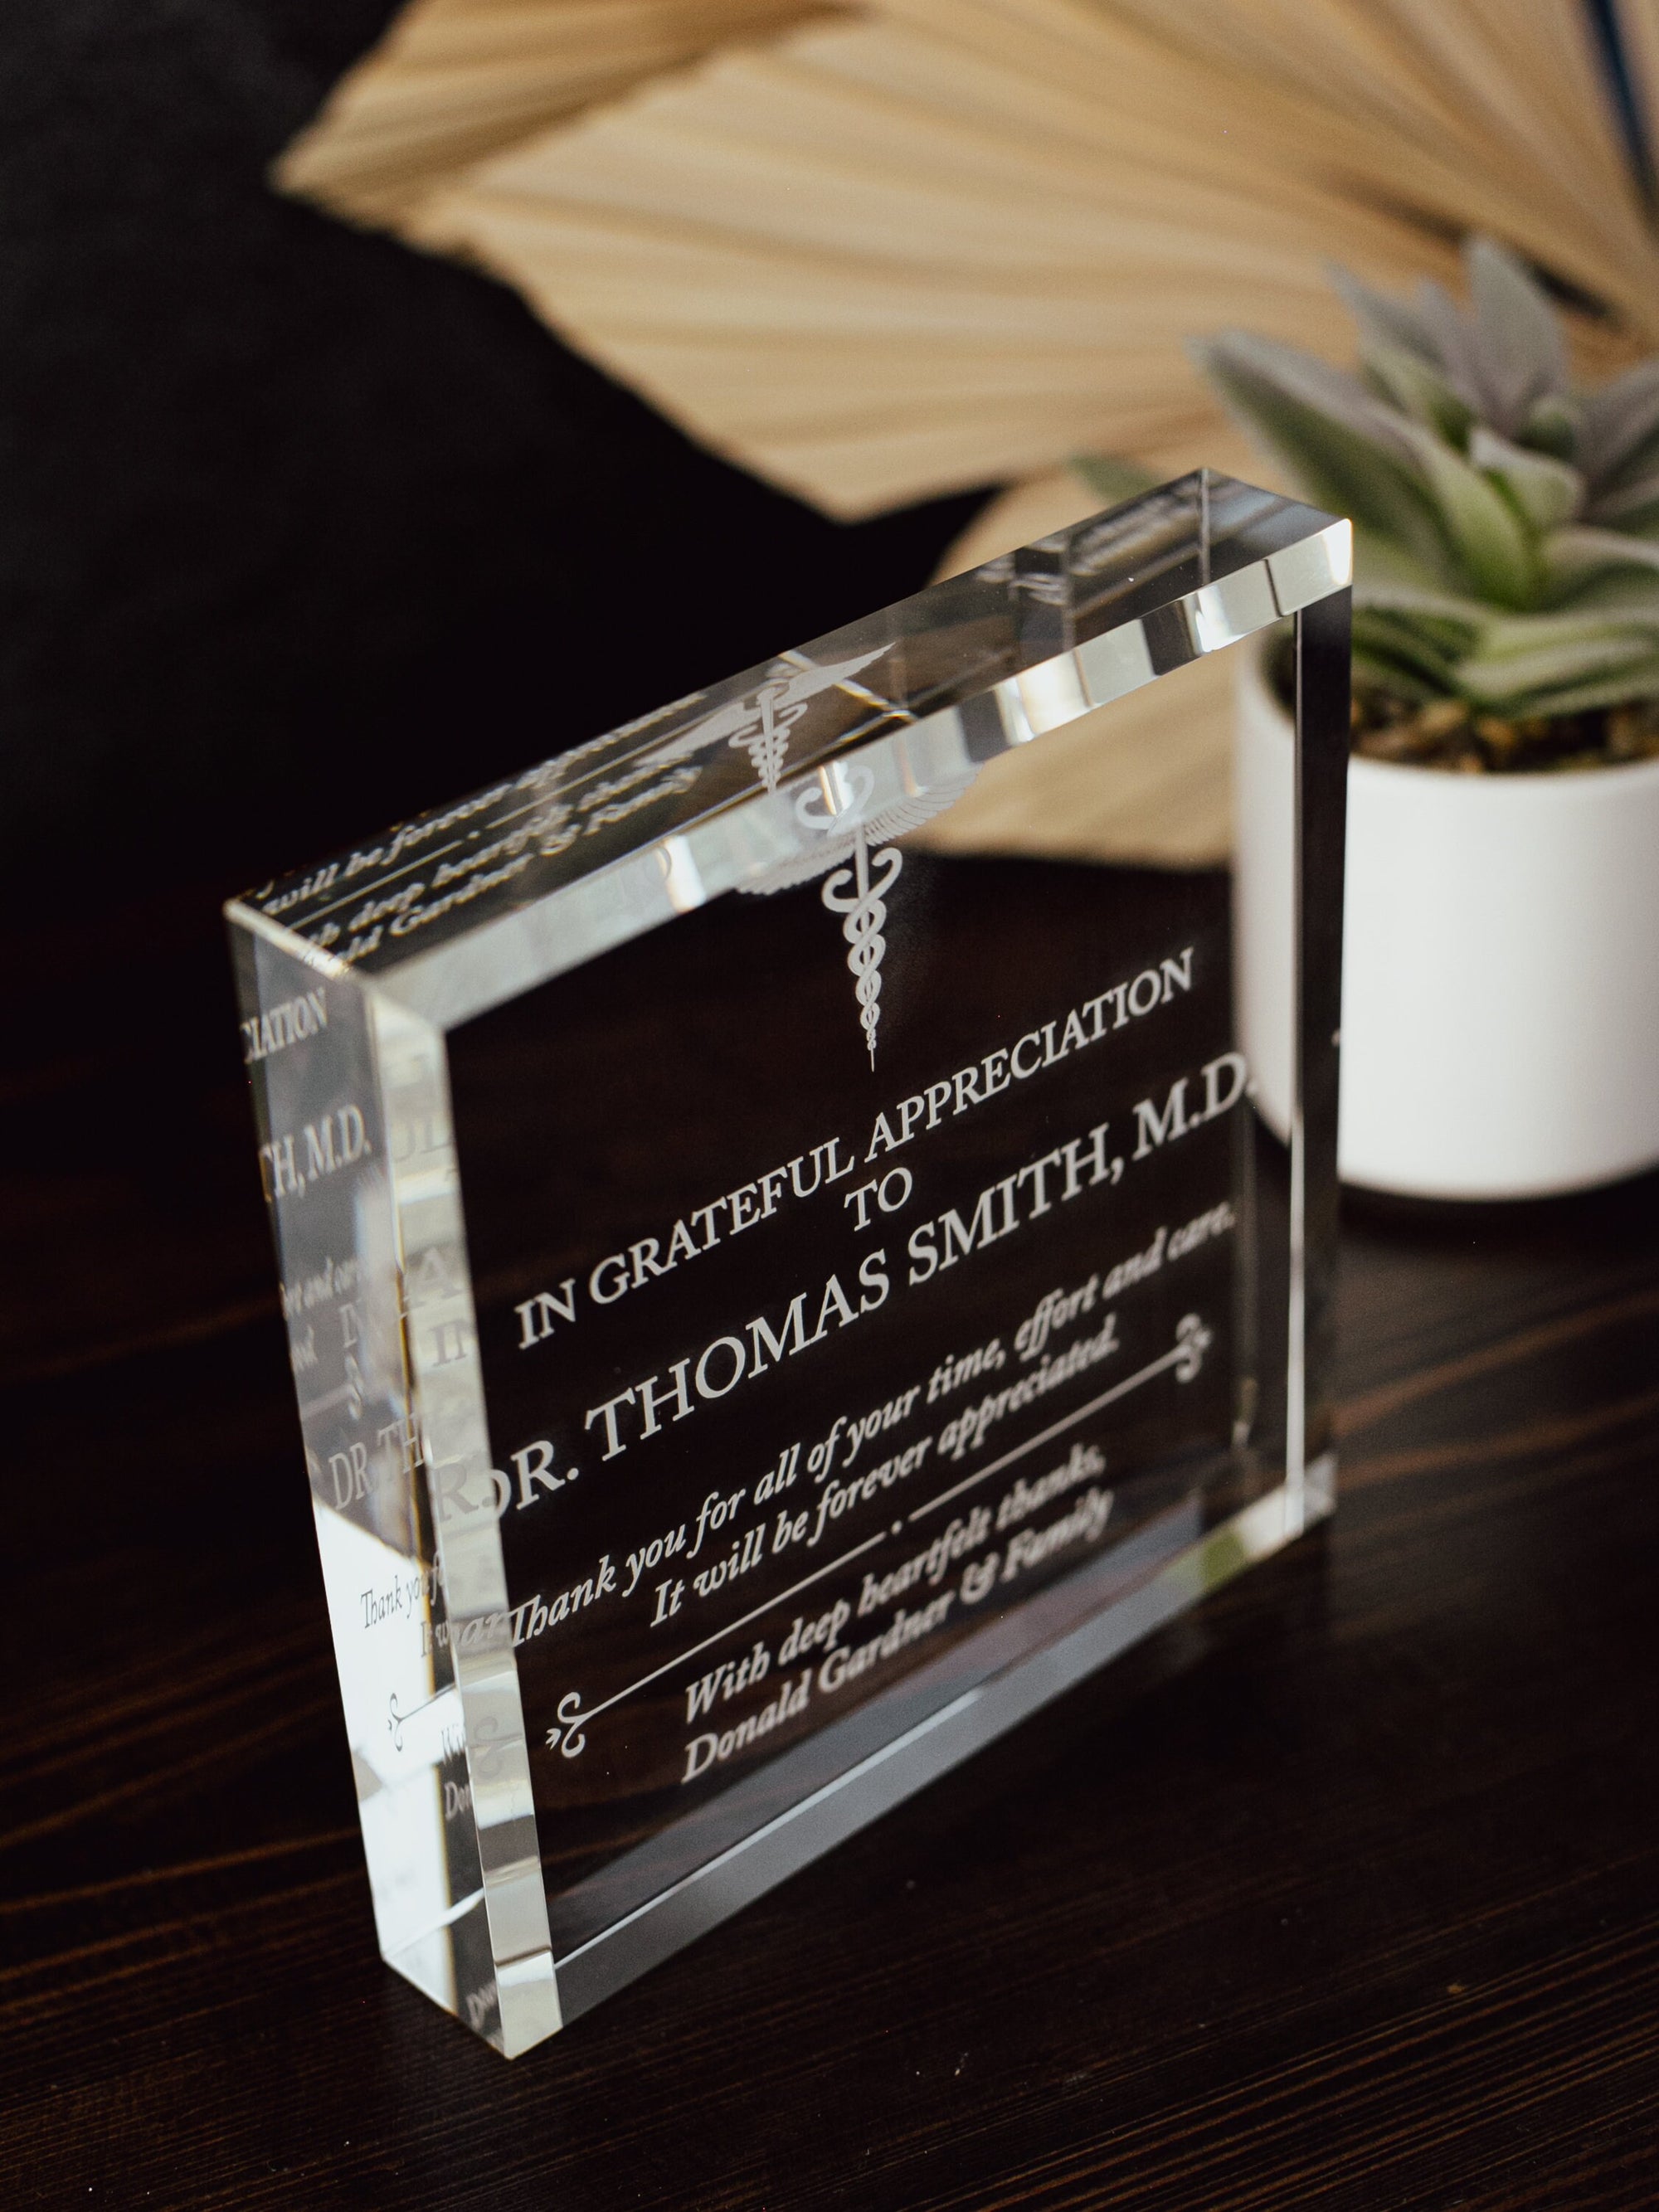 Doctor Appreciation Award Crystal Glass Plaque, for Employee Recognition, Hospital Staff, Doctors and Nurses Trophy, Retirement Gift Plaque